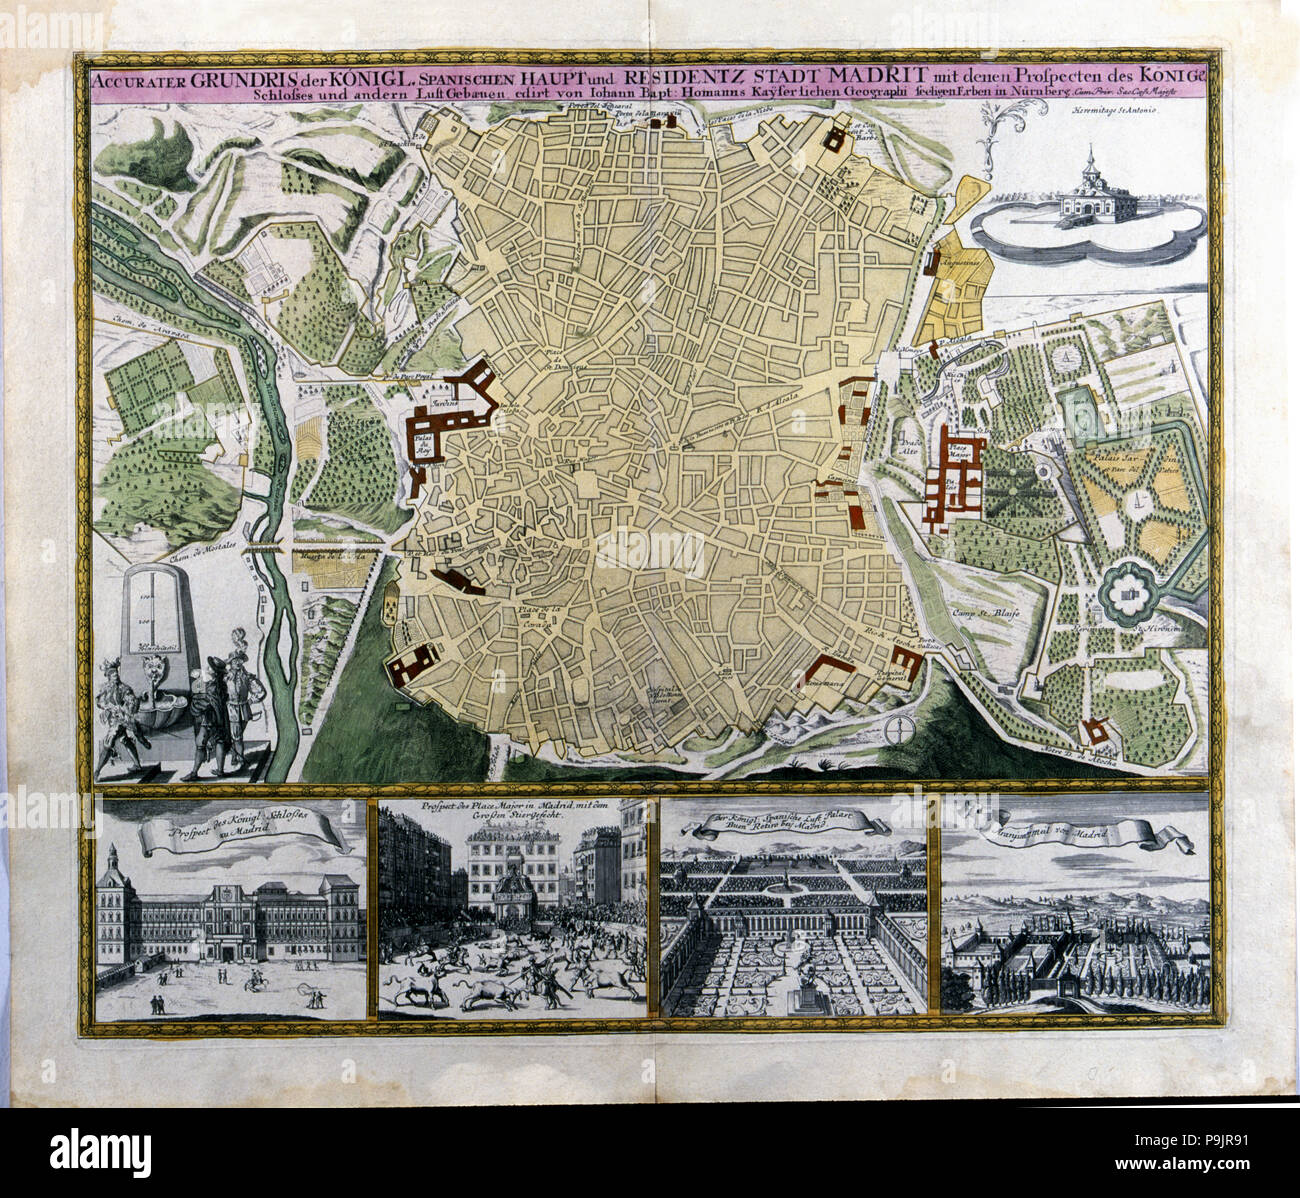 Colored plan of Madrid, hand engraving. Austria, c. 1710, by C. Lotter. Stock Photo